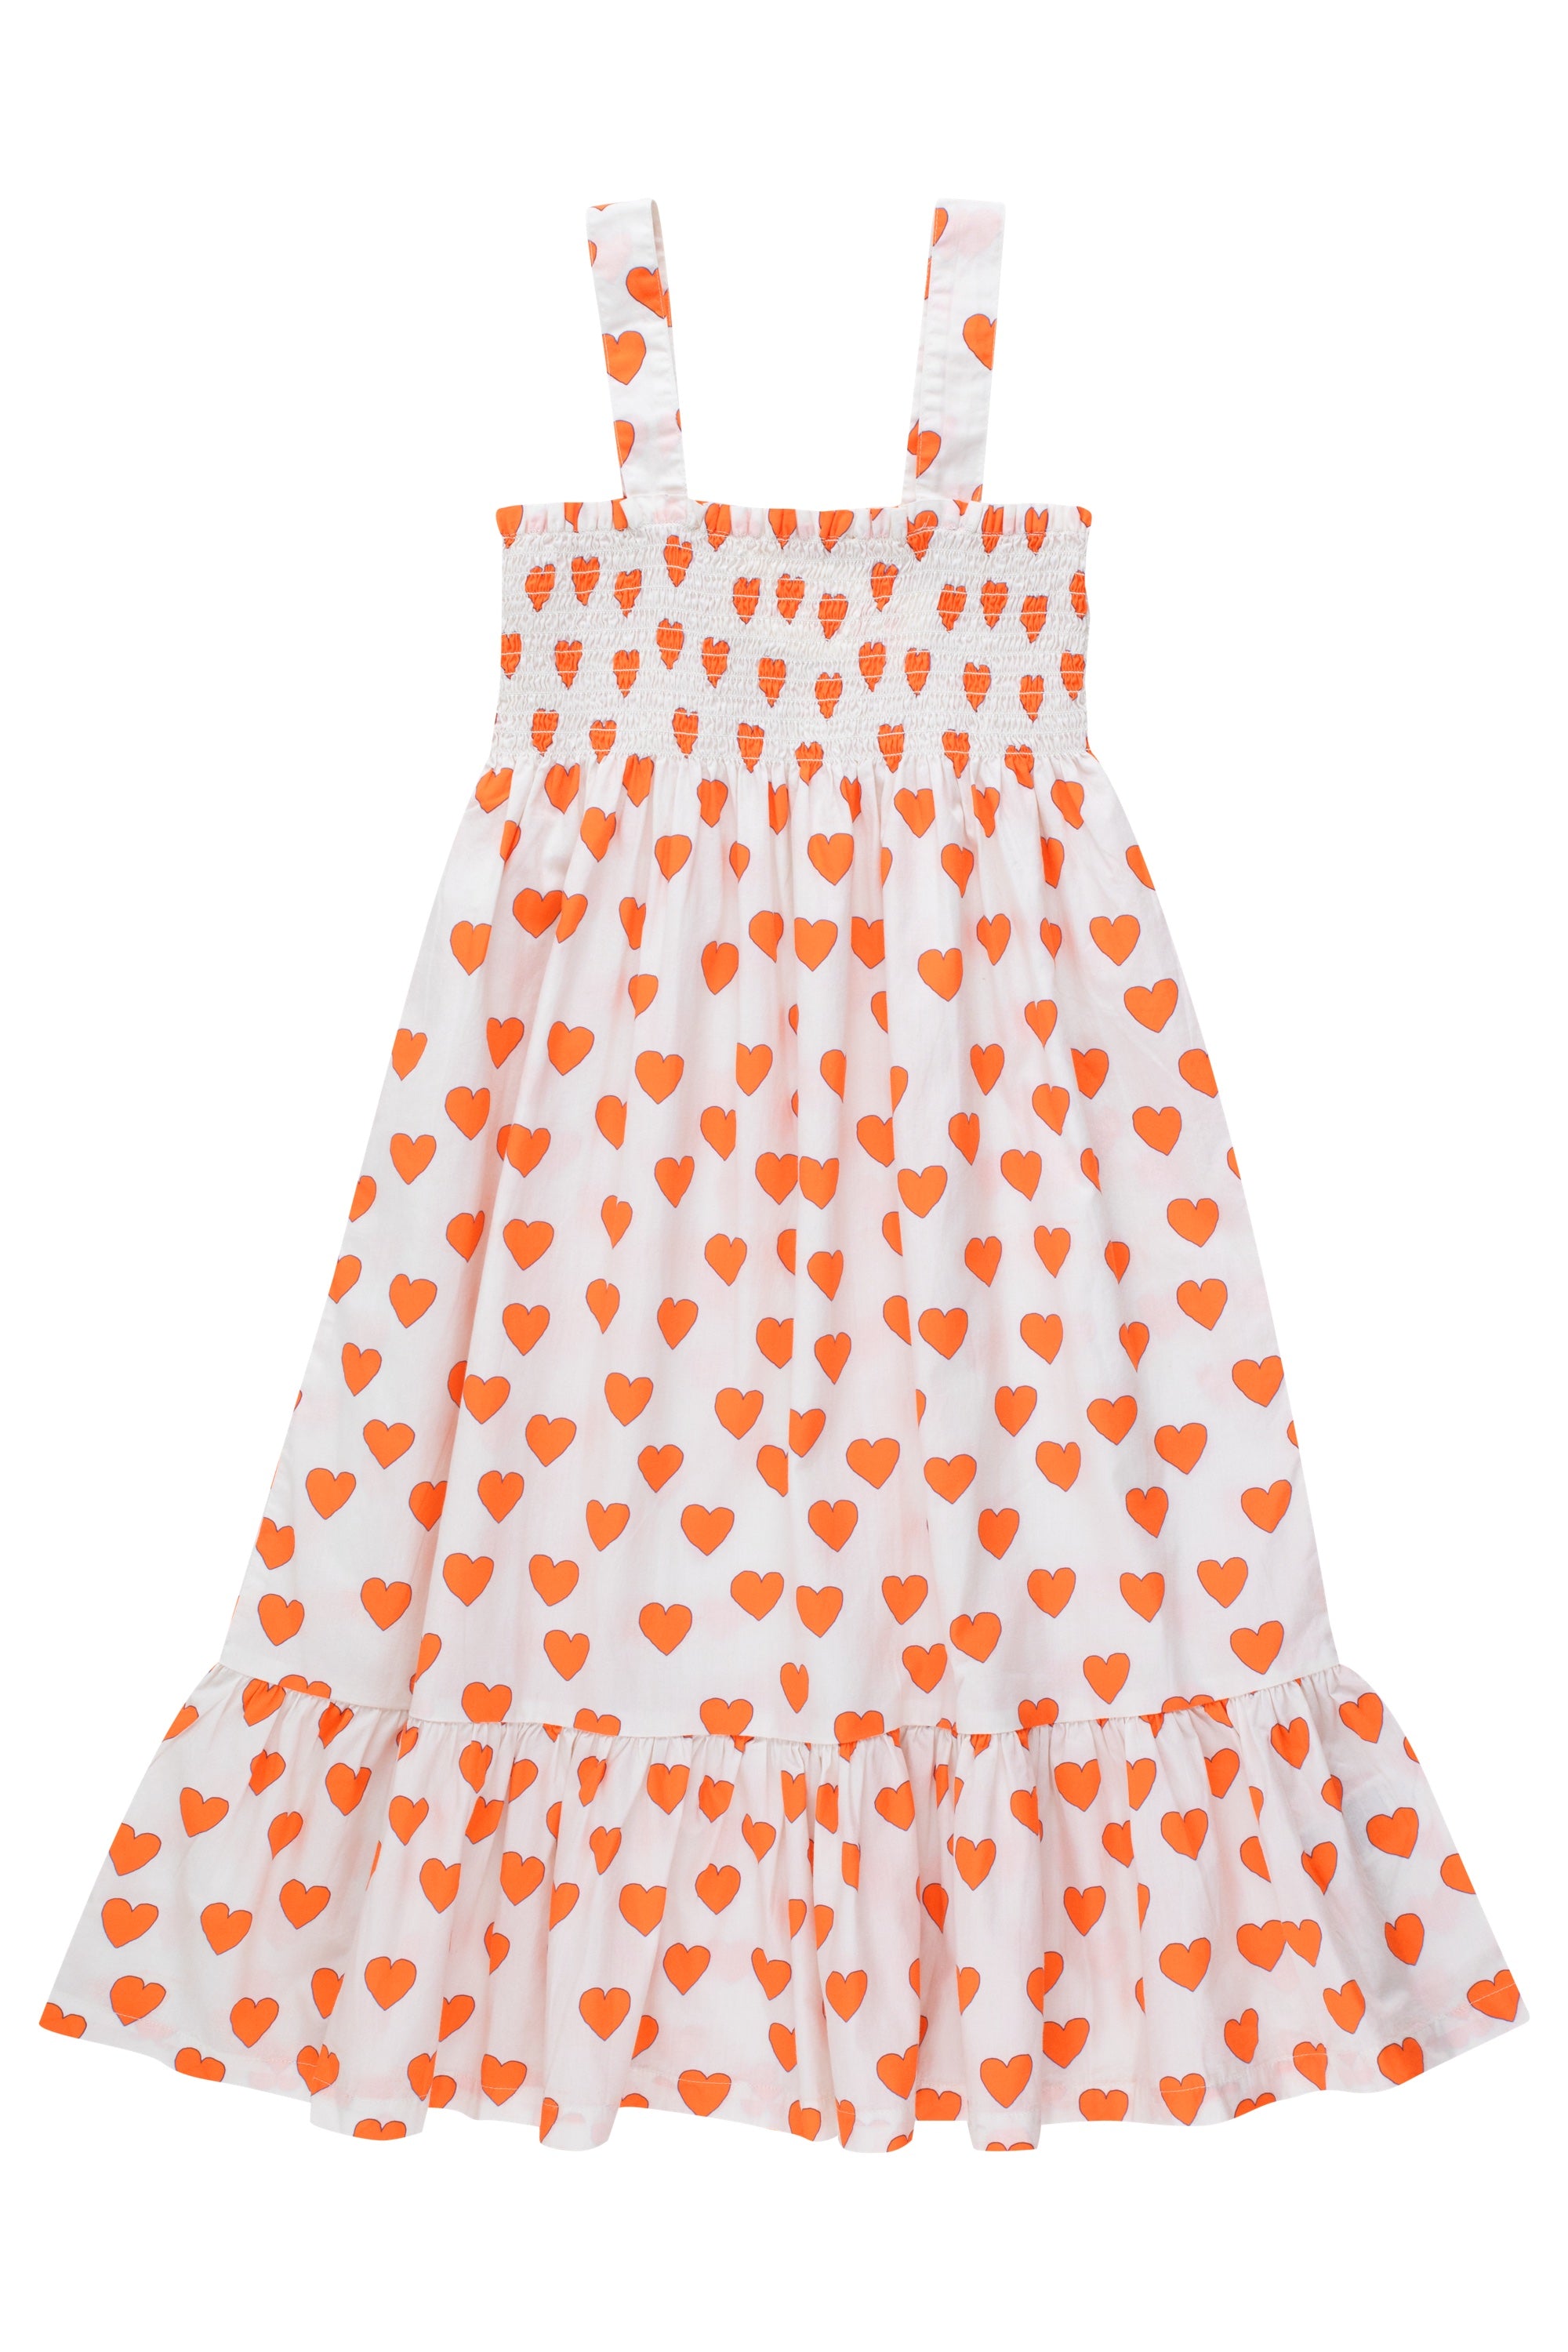 Tiny Cottons Hearts Dress - Off White